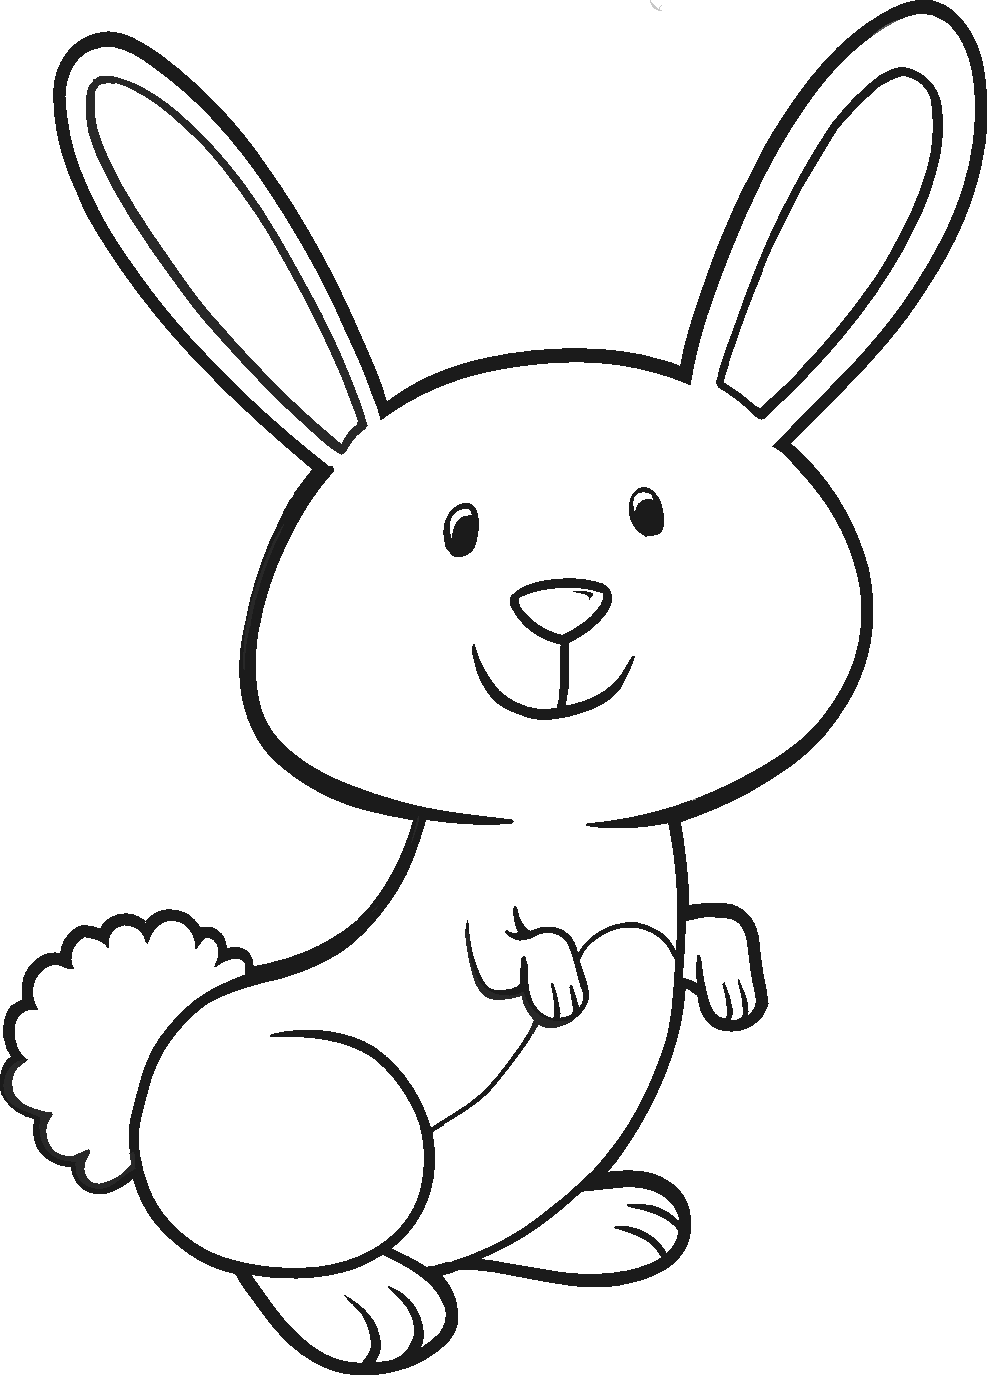 Coloring pages realistic rabbit coloring pages for adults to print peter easter bunny free printable